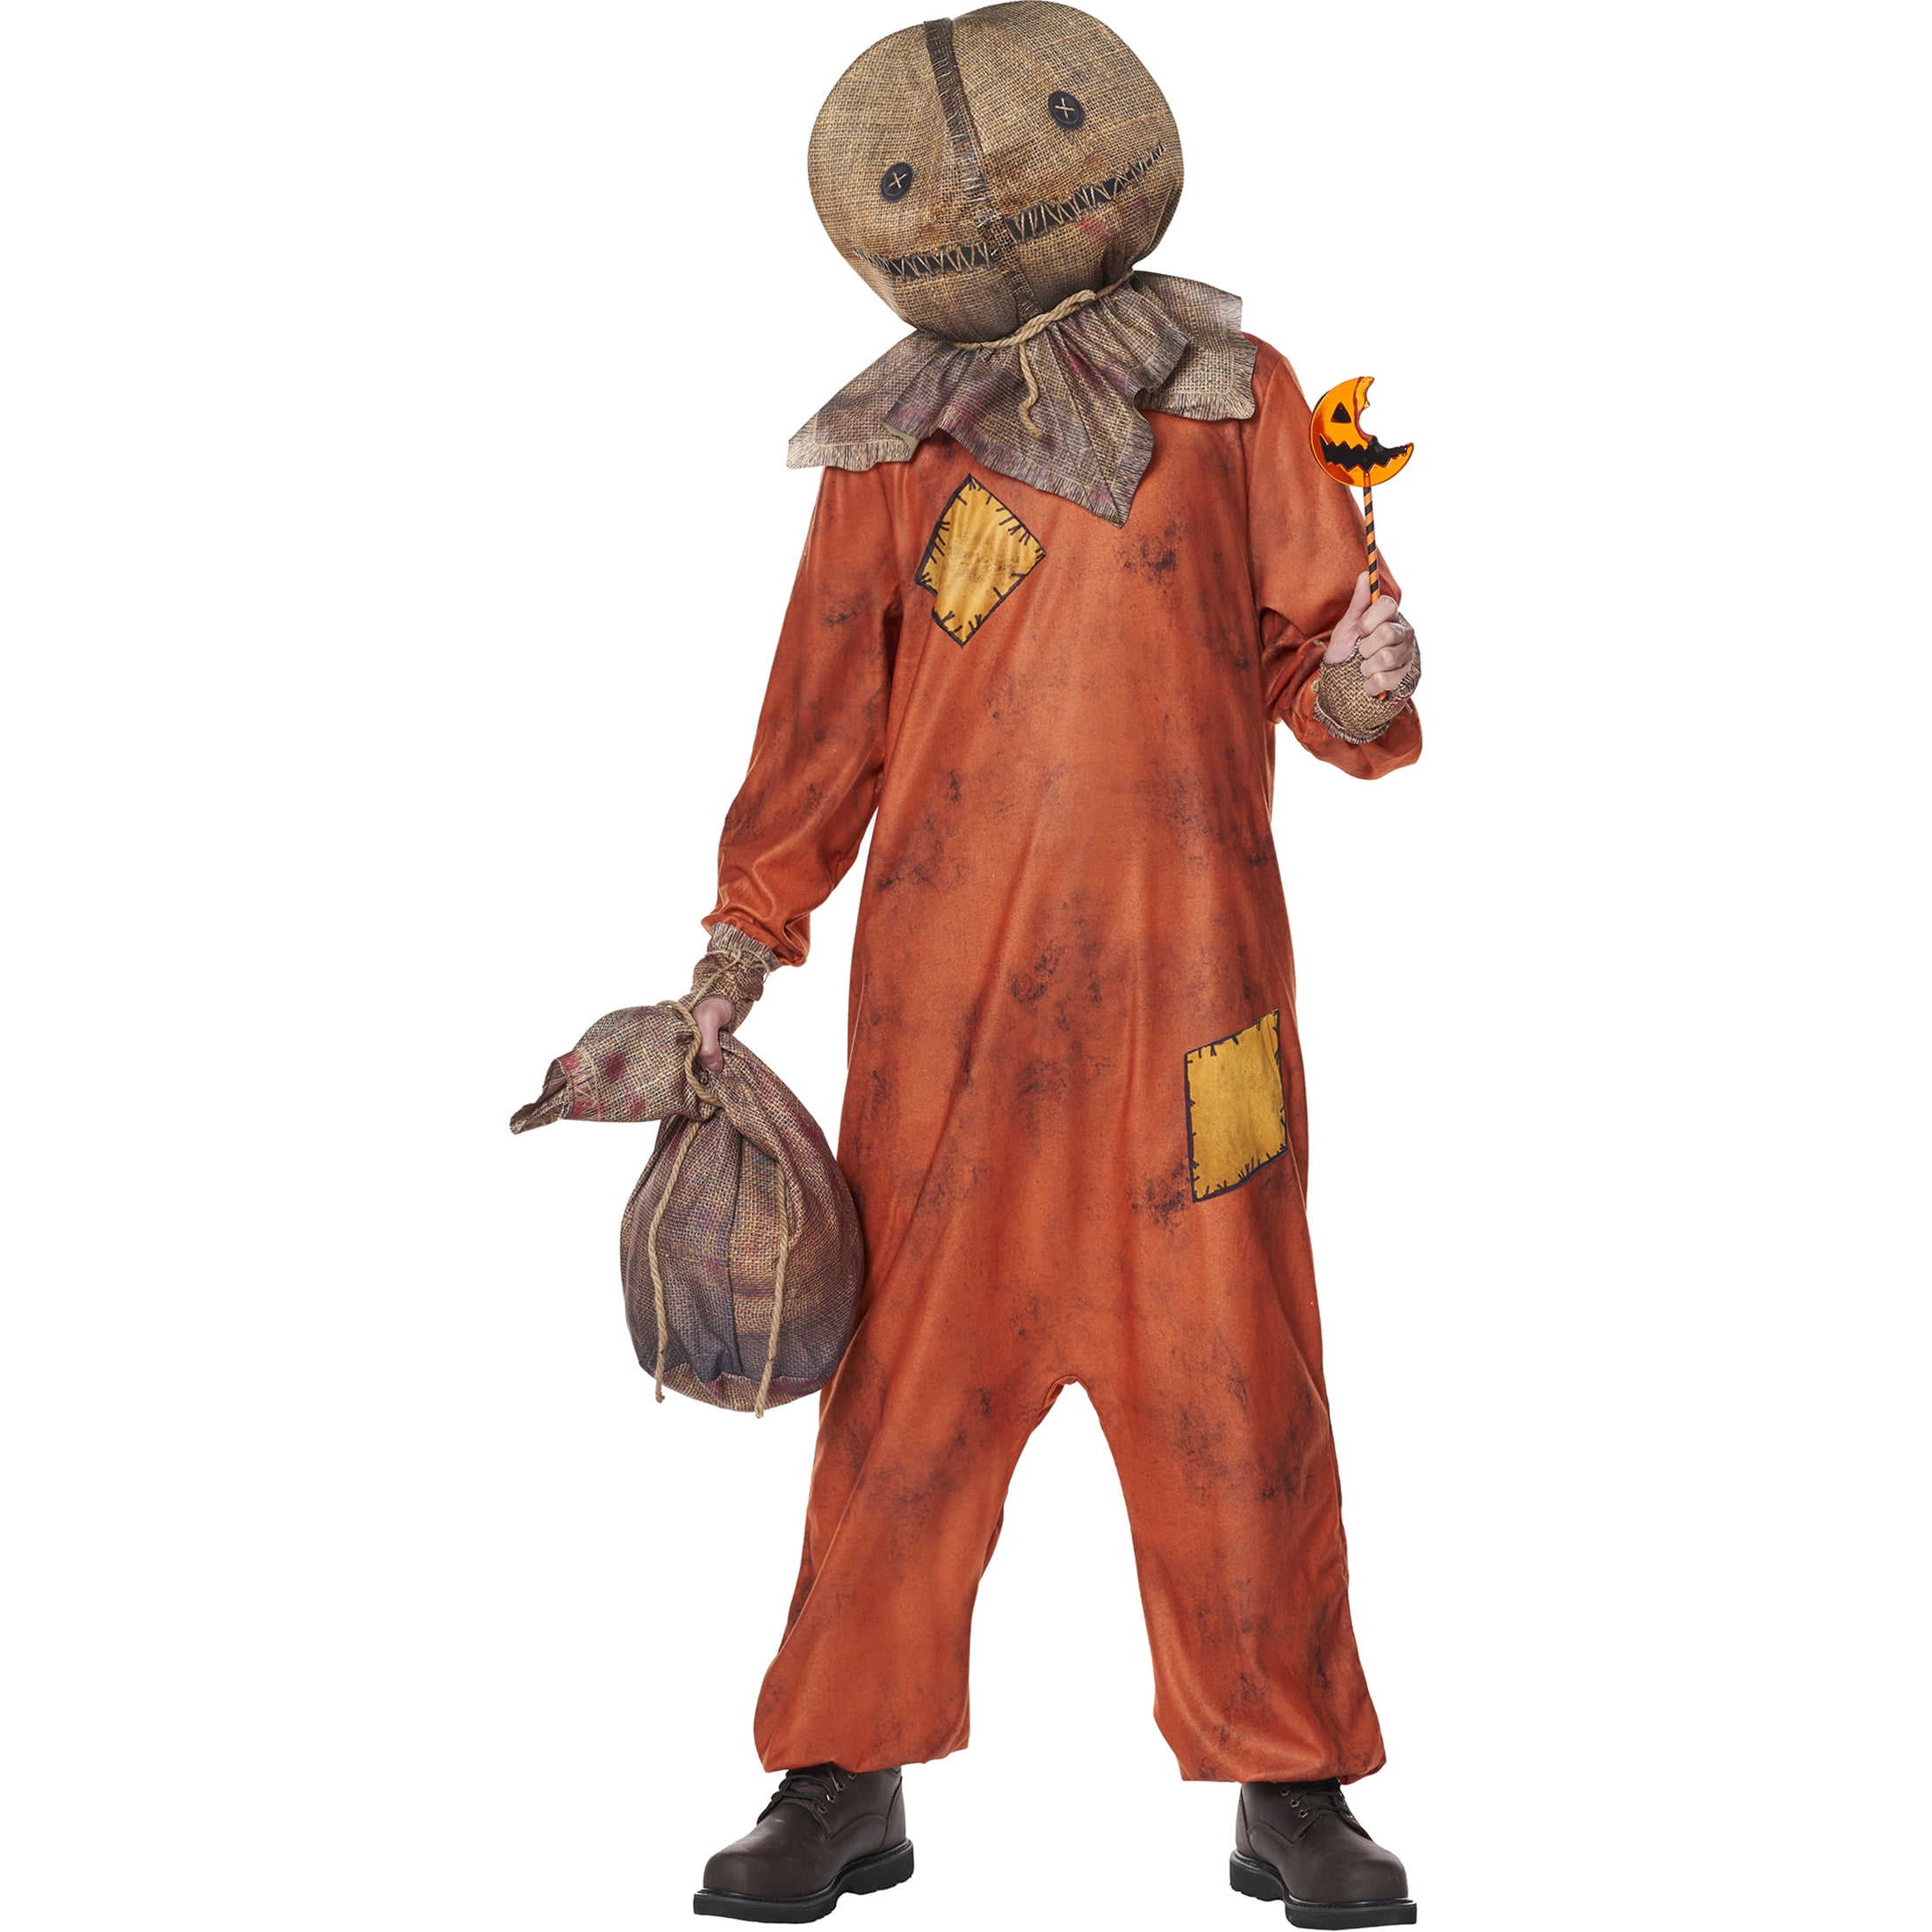 Stanley Yelnats from Holes Costume  Carbon Costume  DIY DressUp Guides  for Cosplay  Halloween